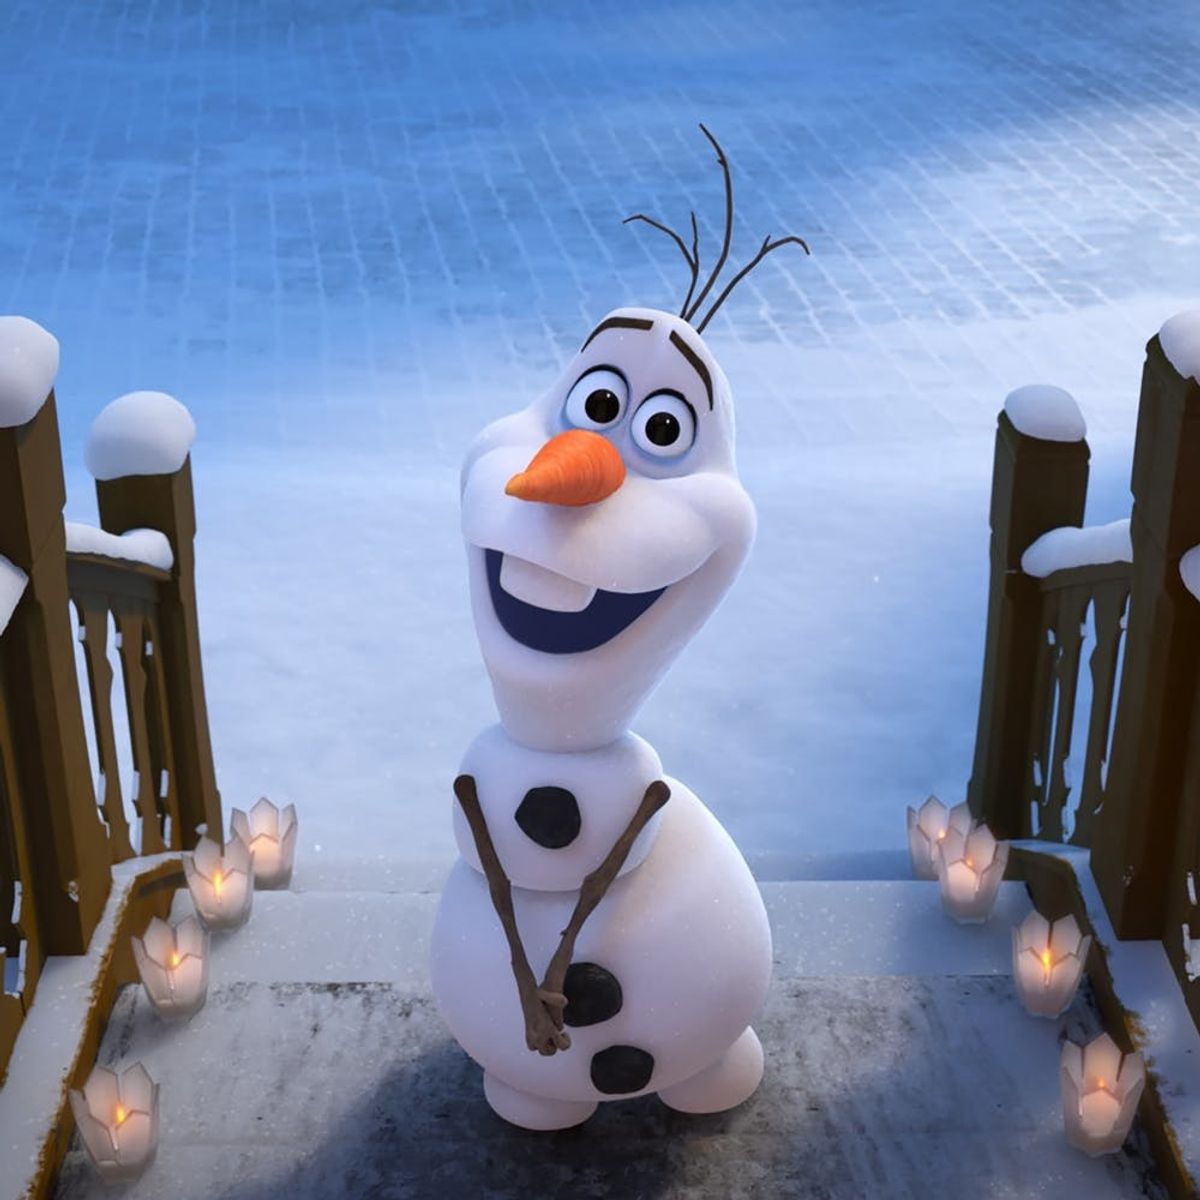 Disney’s ‘Olaf’s Frozen Adventure’ Is Leaving Theaters and Heading to TV